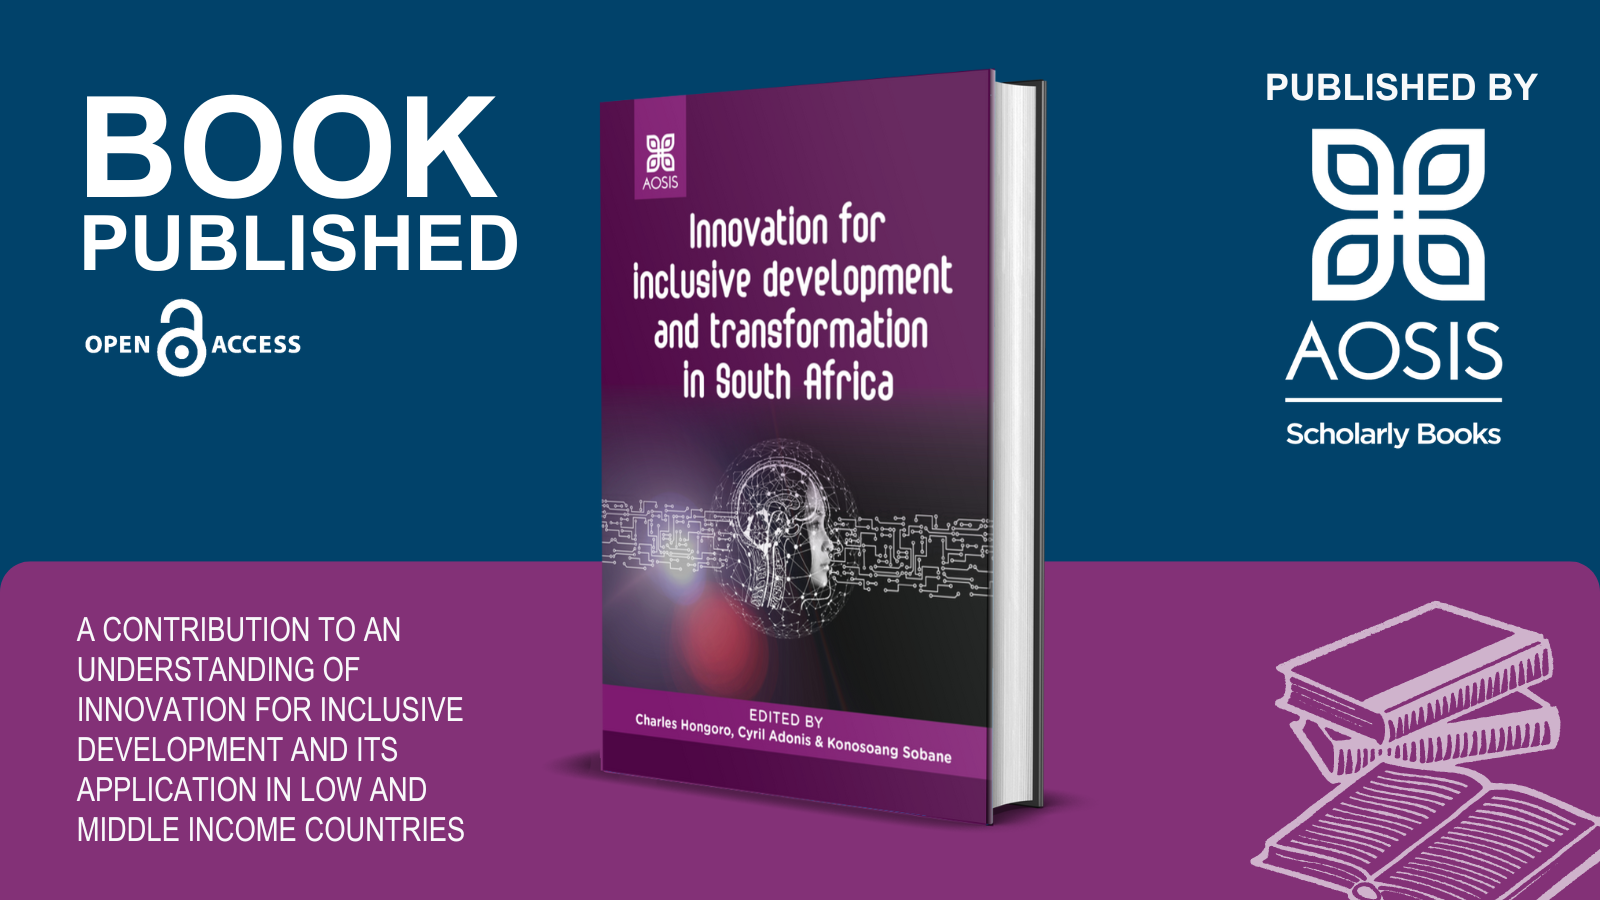 AOSIS Scholarly Books publishes ‘Innovation for inclusive development and transformation in South Africa’